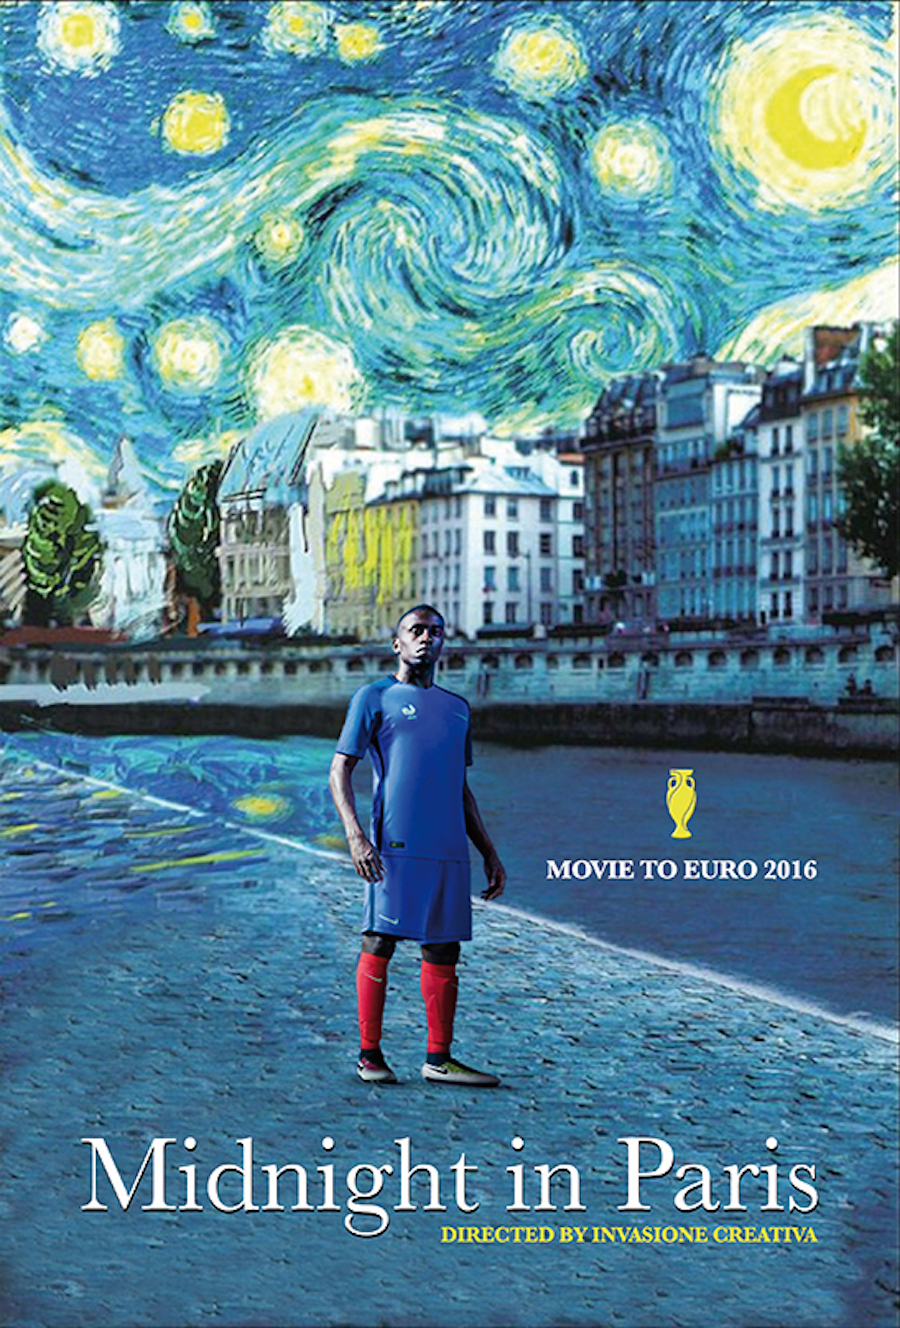 Movie Posters Revisited with Euro 2016 Teams9